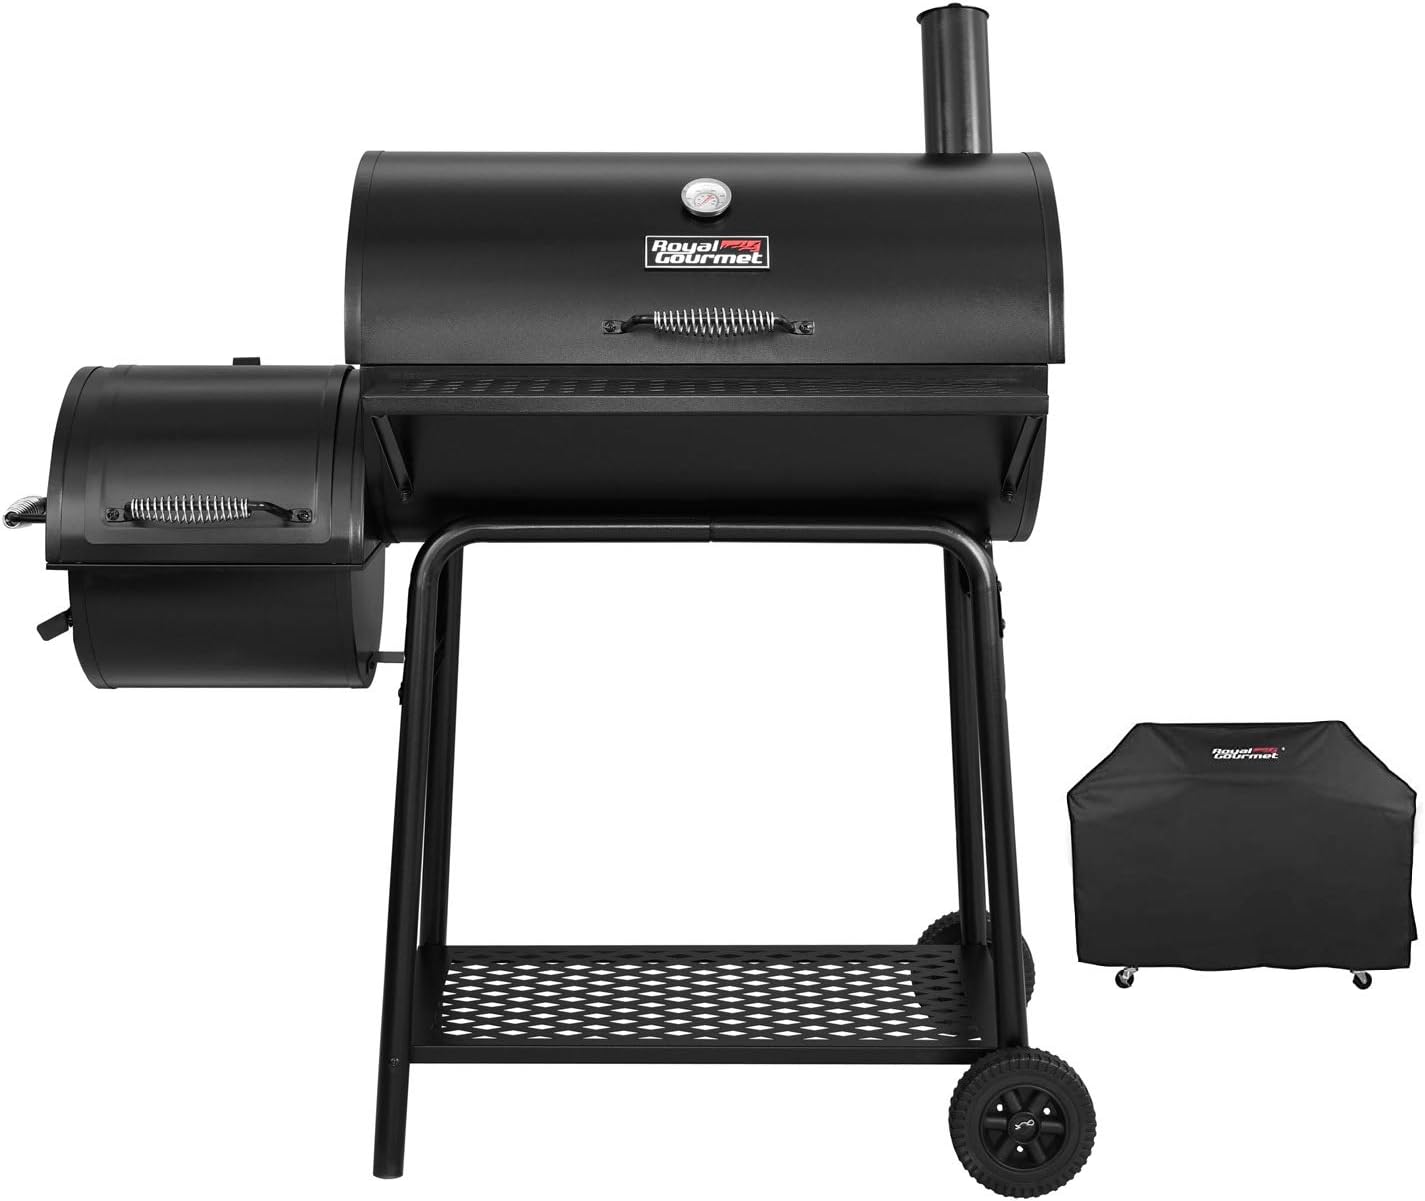 Royal Gourmet CC1830FC Charcoal Grill Offset Smoker Review